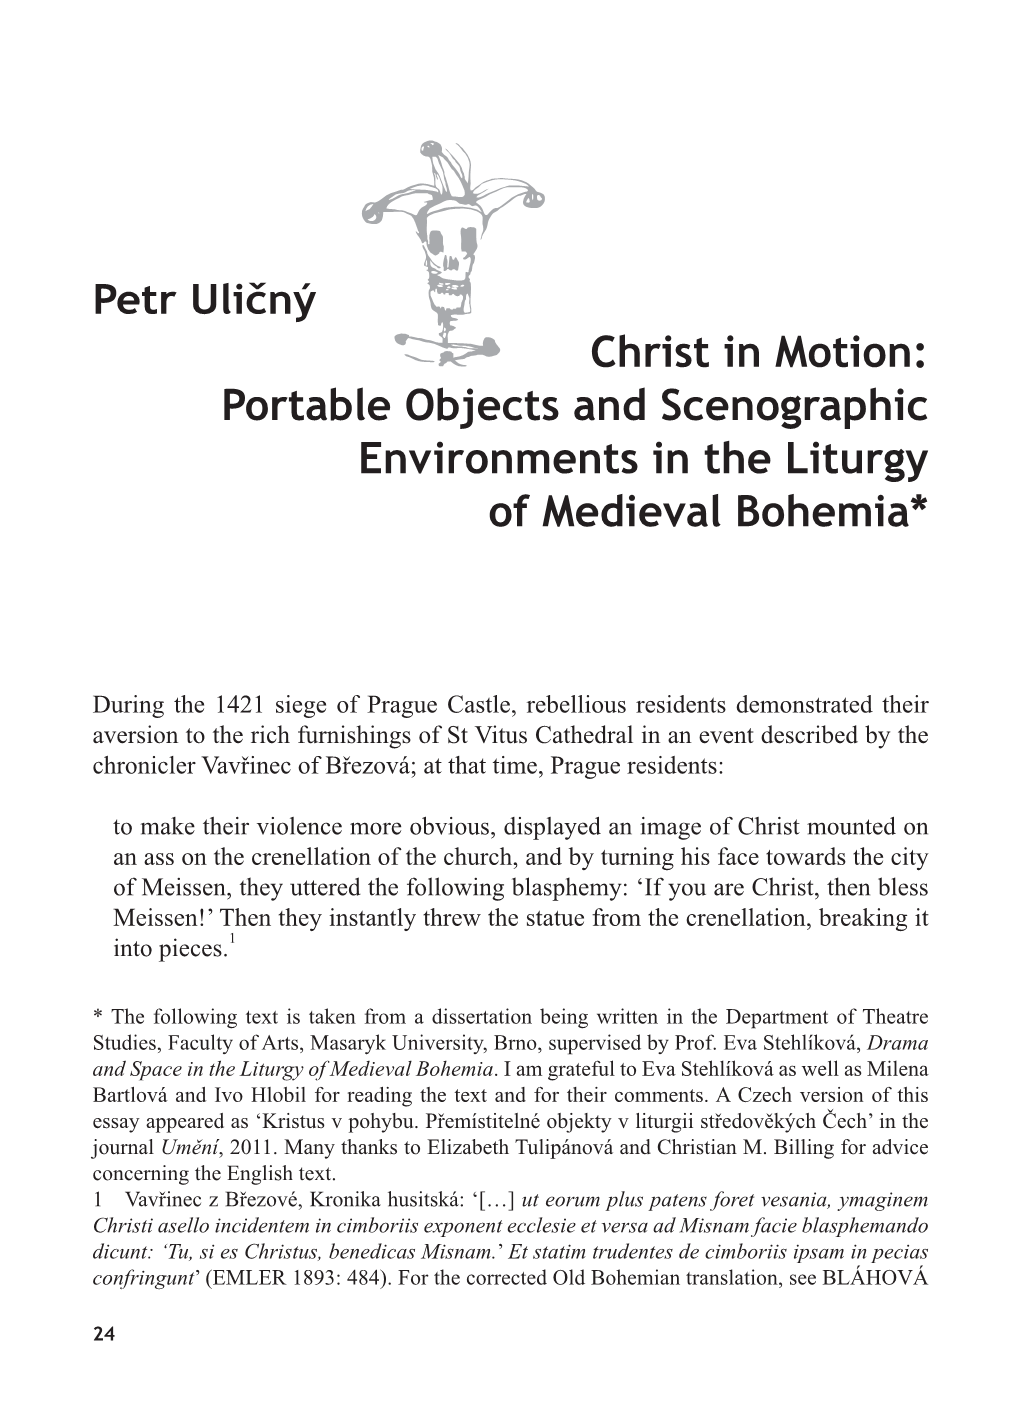 Christ in Motion: Portable Objects and Scenographic Environments in the Liturgy of Medieval Bohemia*